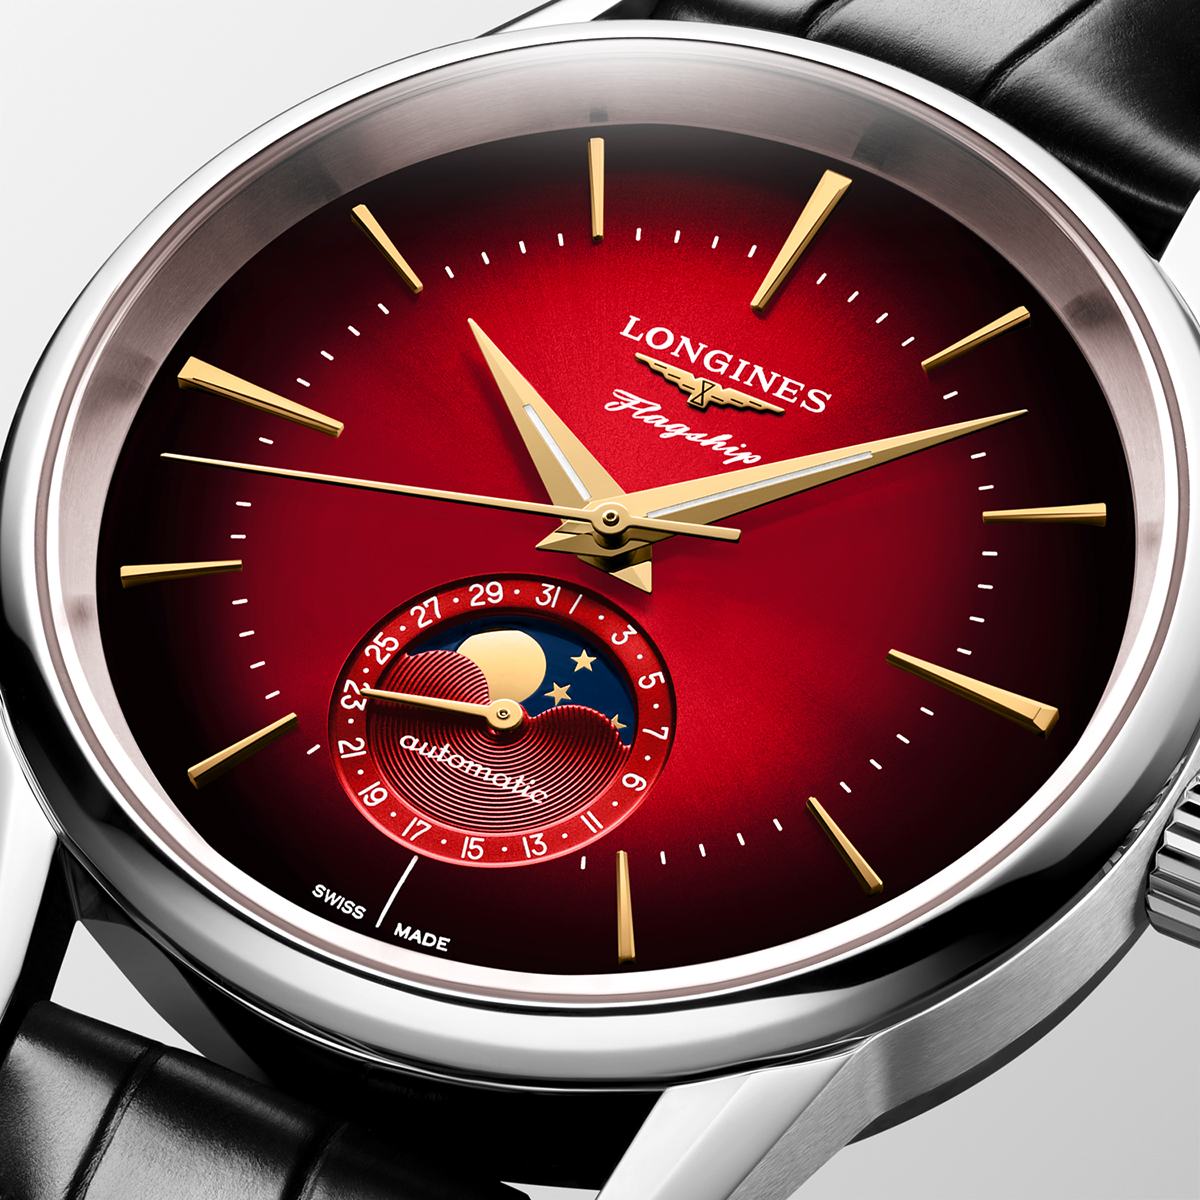 Cortina-Watch-Longines-Flagship-Heritage-Year-of-the-Dragon-dial